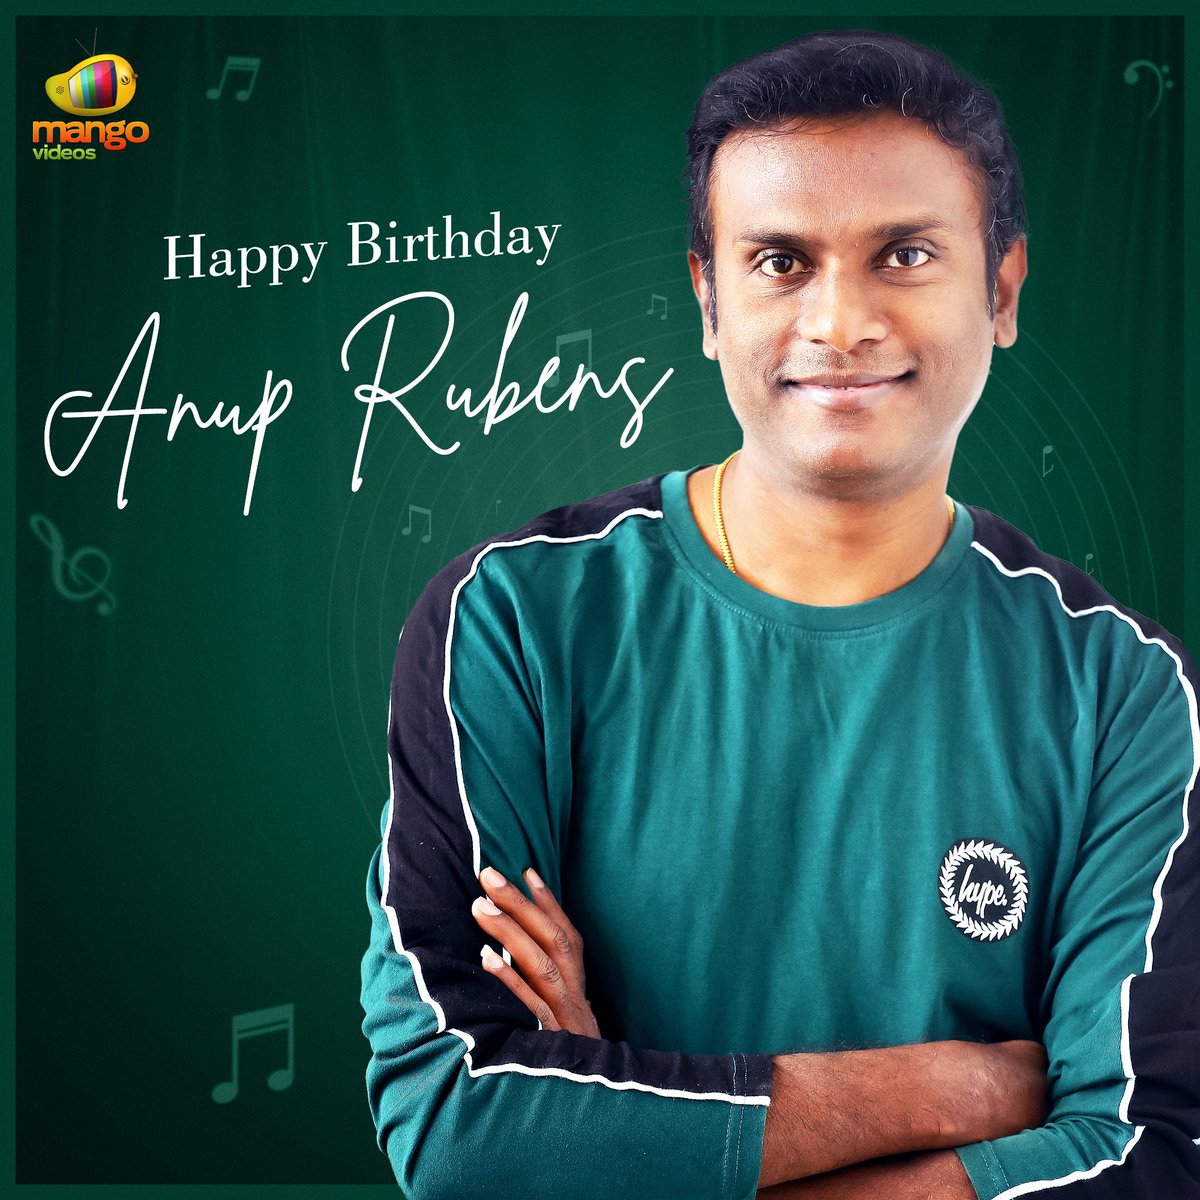 Join us in wishing the Musical Maestro #AnupRubens a very Happy Birthday🎂🎉🎉

Wishing you a wonderful musical year ahead 🎶💕

#HappyBirthdayAnupRubens #HBDAnupRubens @anuprubens #Tollywood #MangoVideos